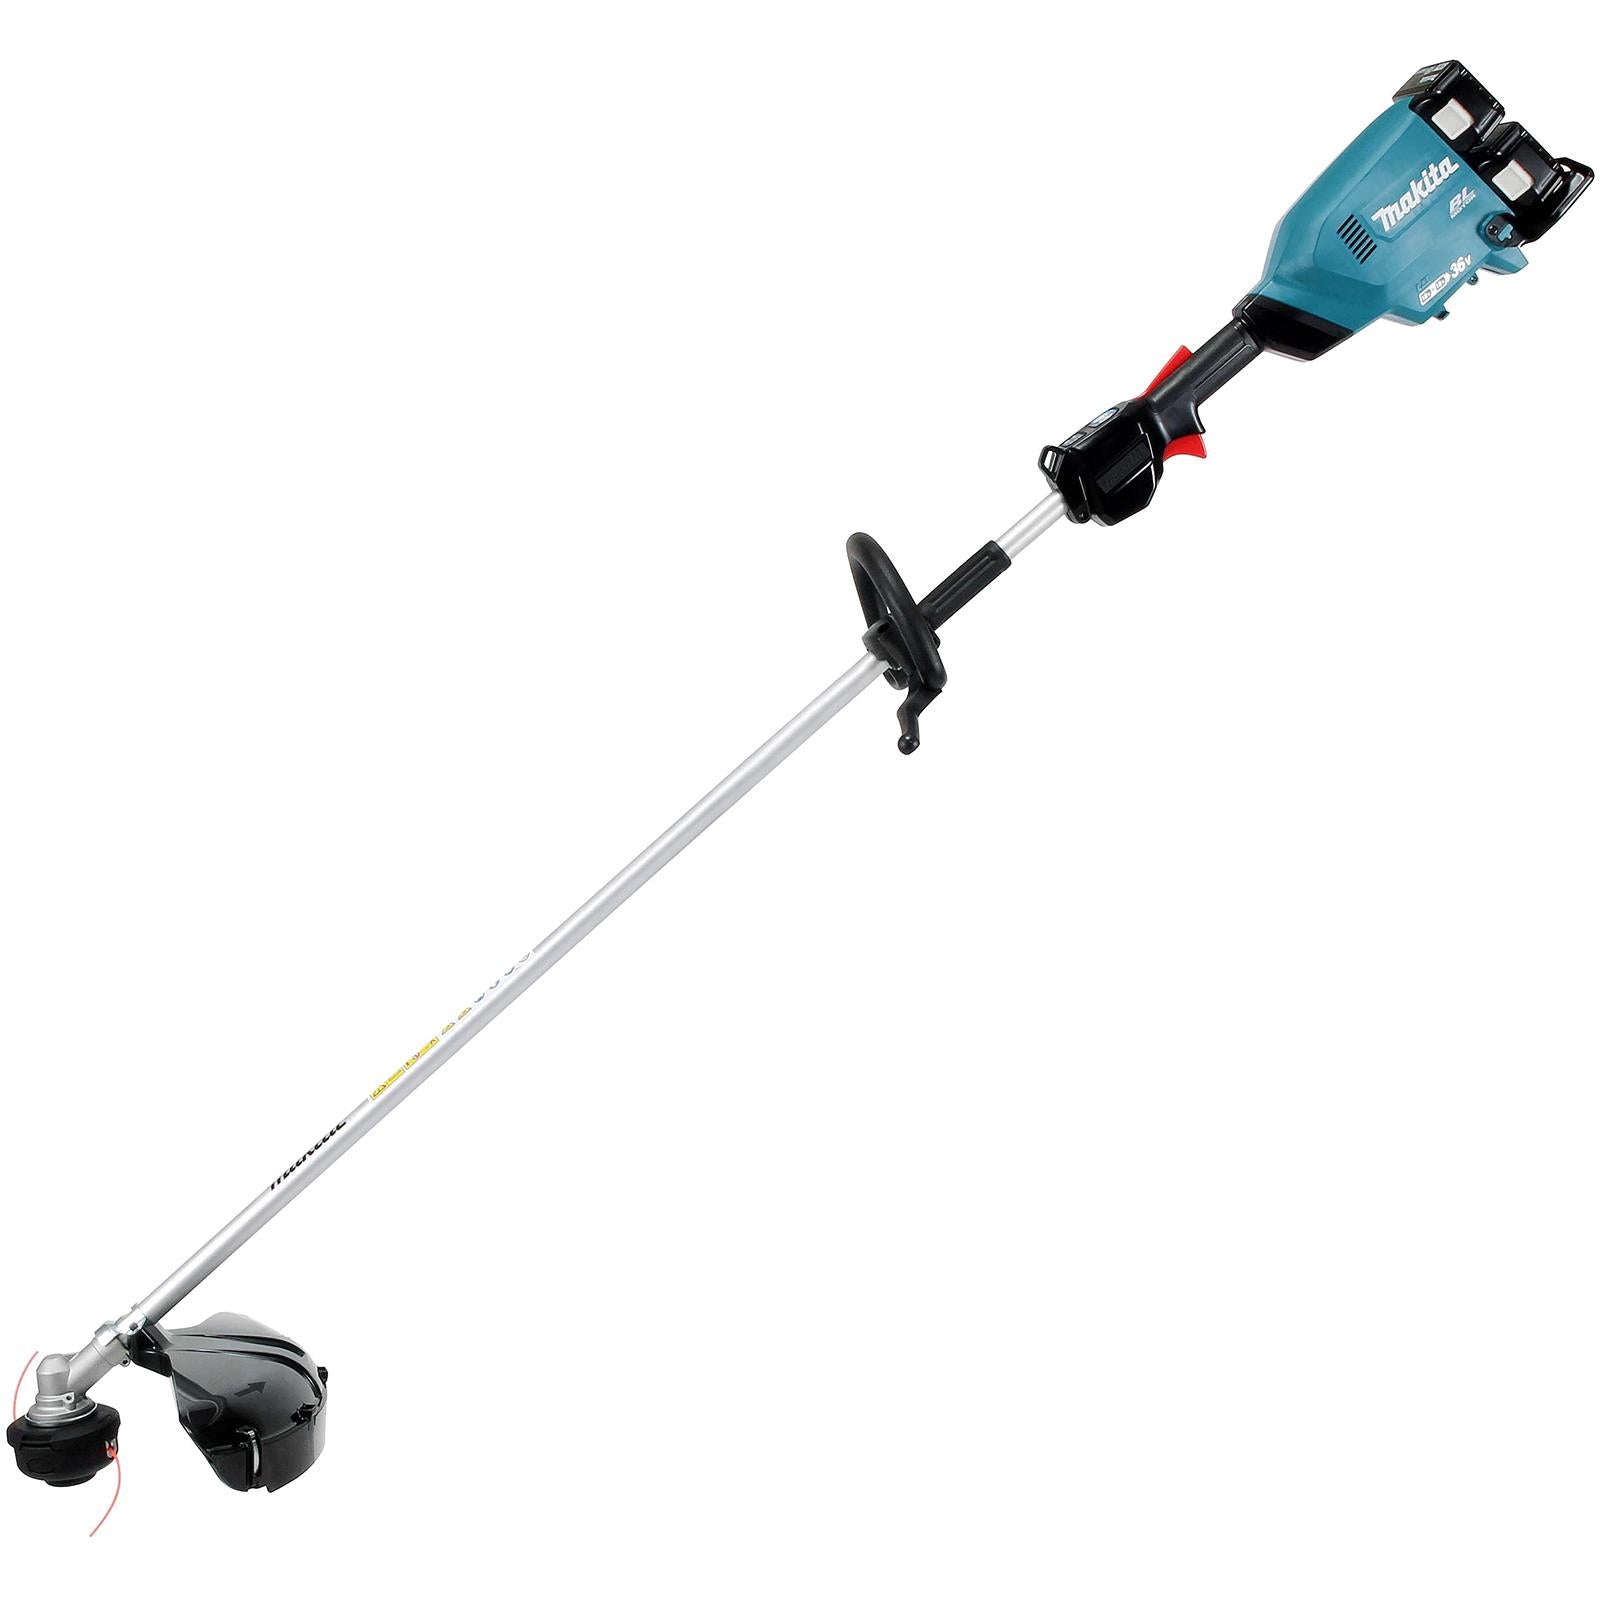 Makita Line Trimmer Strimmer Kit 2 x 18V LXT Brushless Cordless Garden Lawn Strimming 2 x 5Ah Battery and Dual Rapid Charger DUR369LPT2